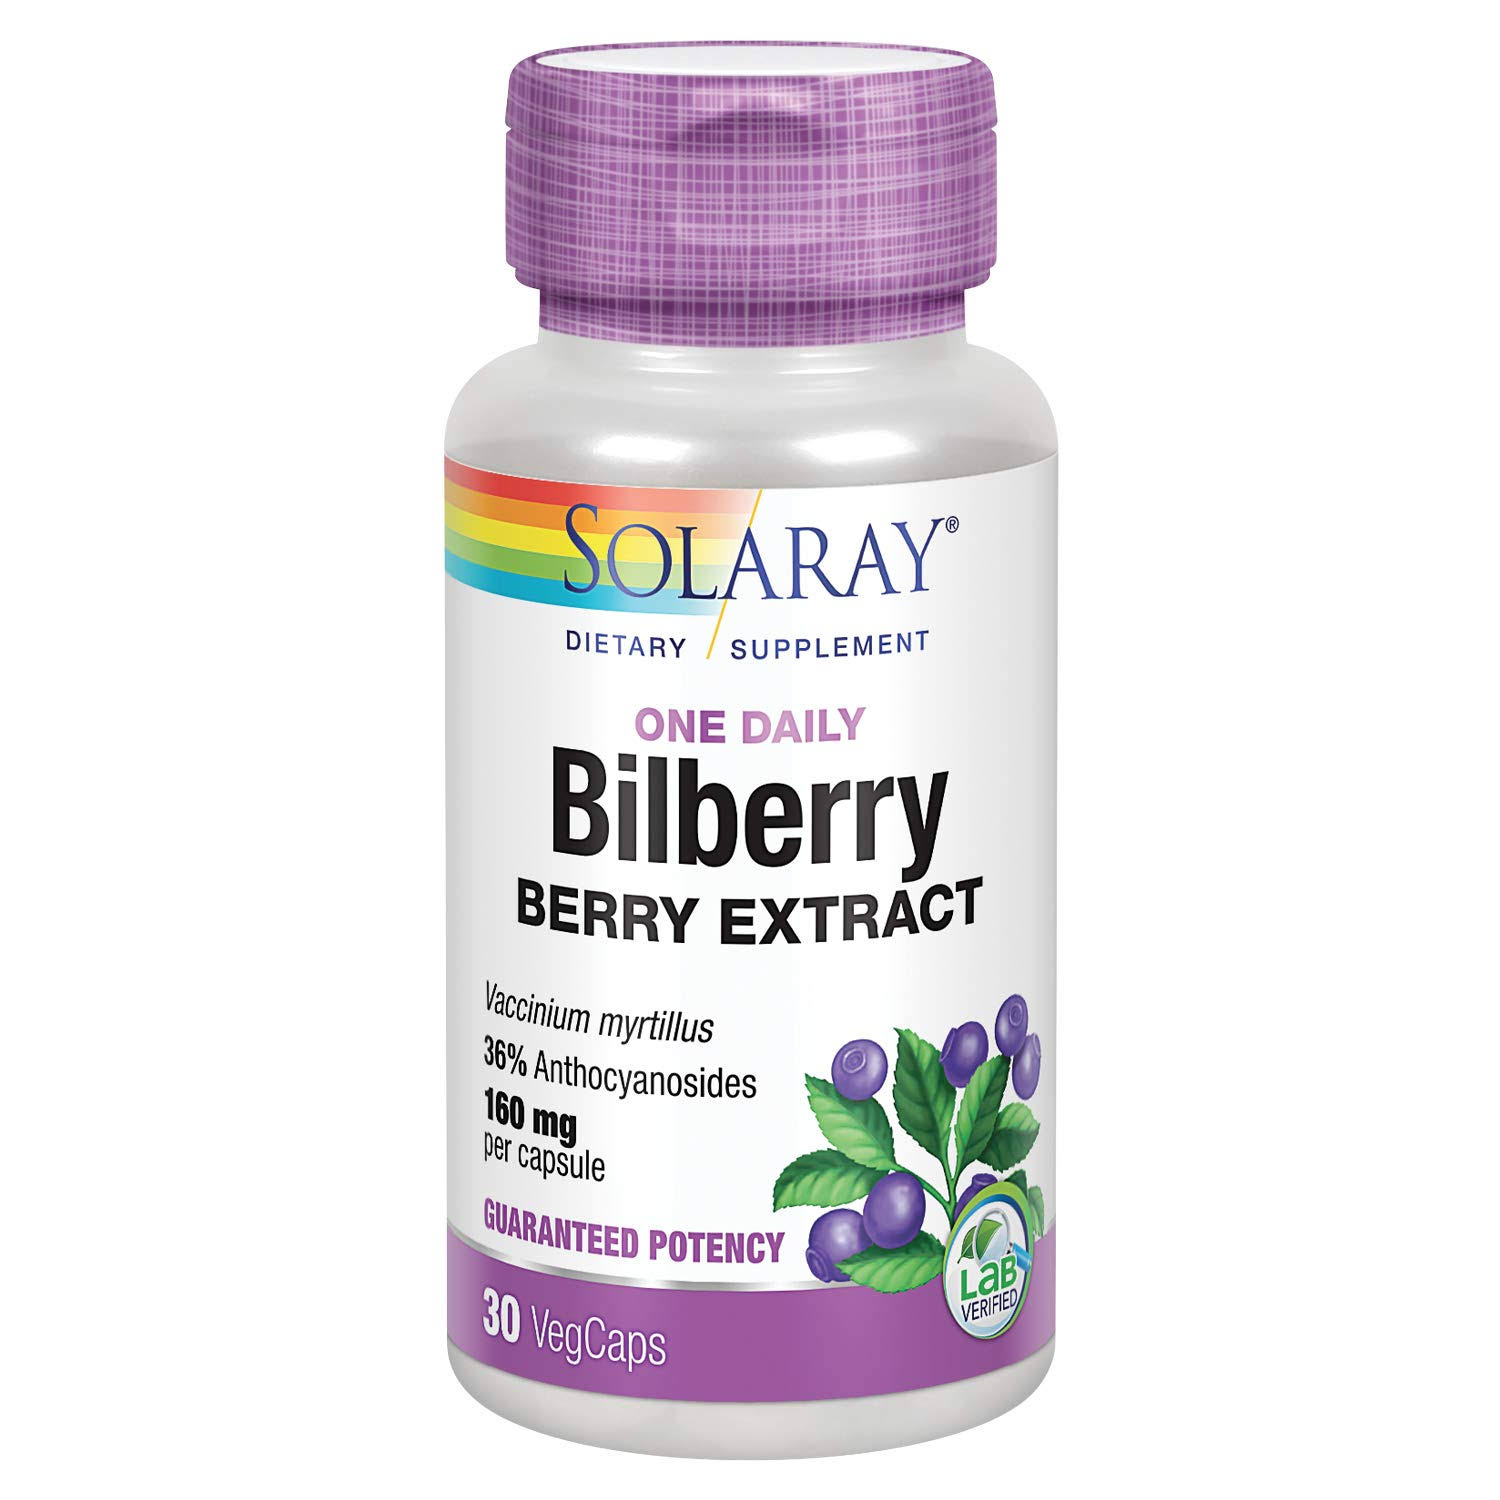 Solaray Bilberry One Daily Extract Dietary Supplement - 160mg, 30ct